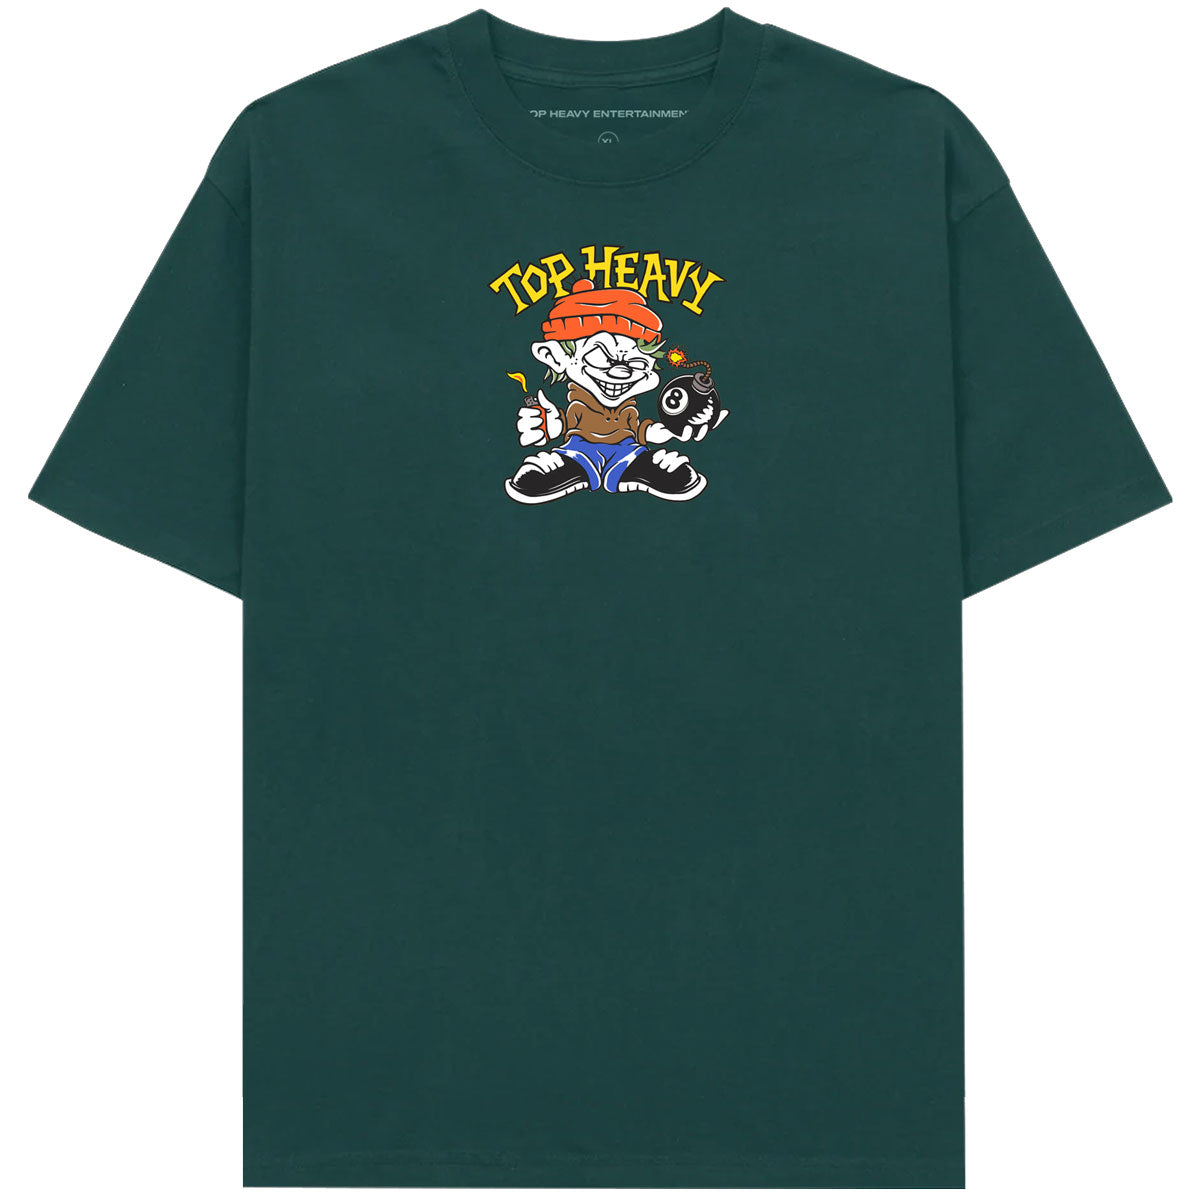 Top Heavy Top Boy T-Shirt - Forest image 1